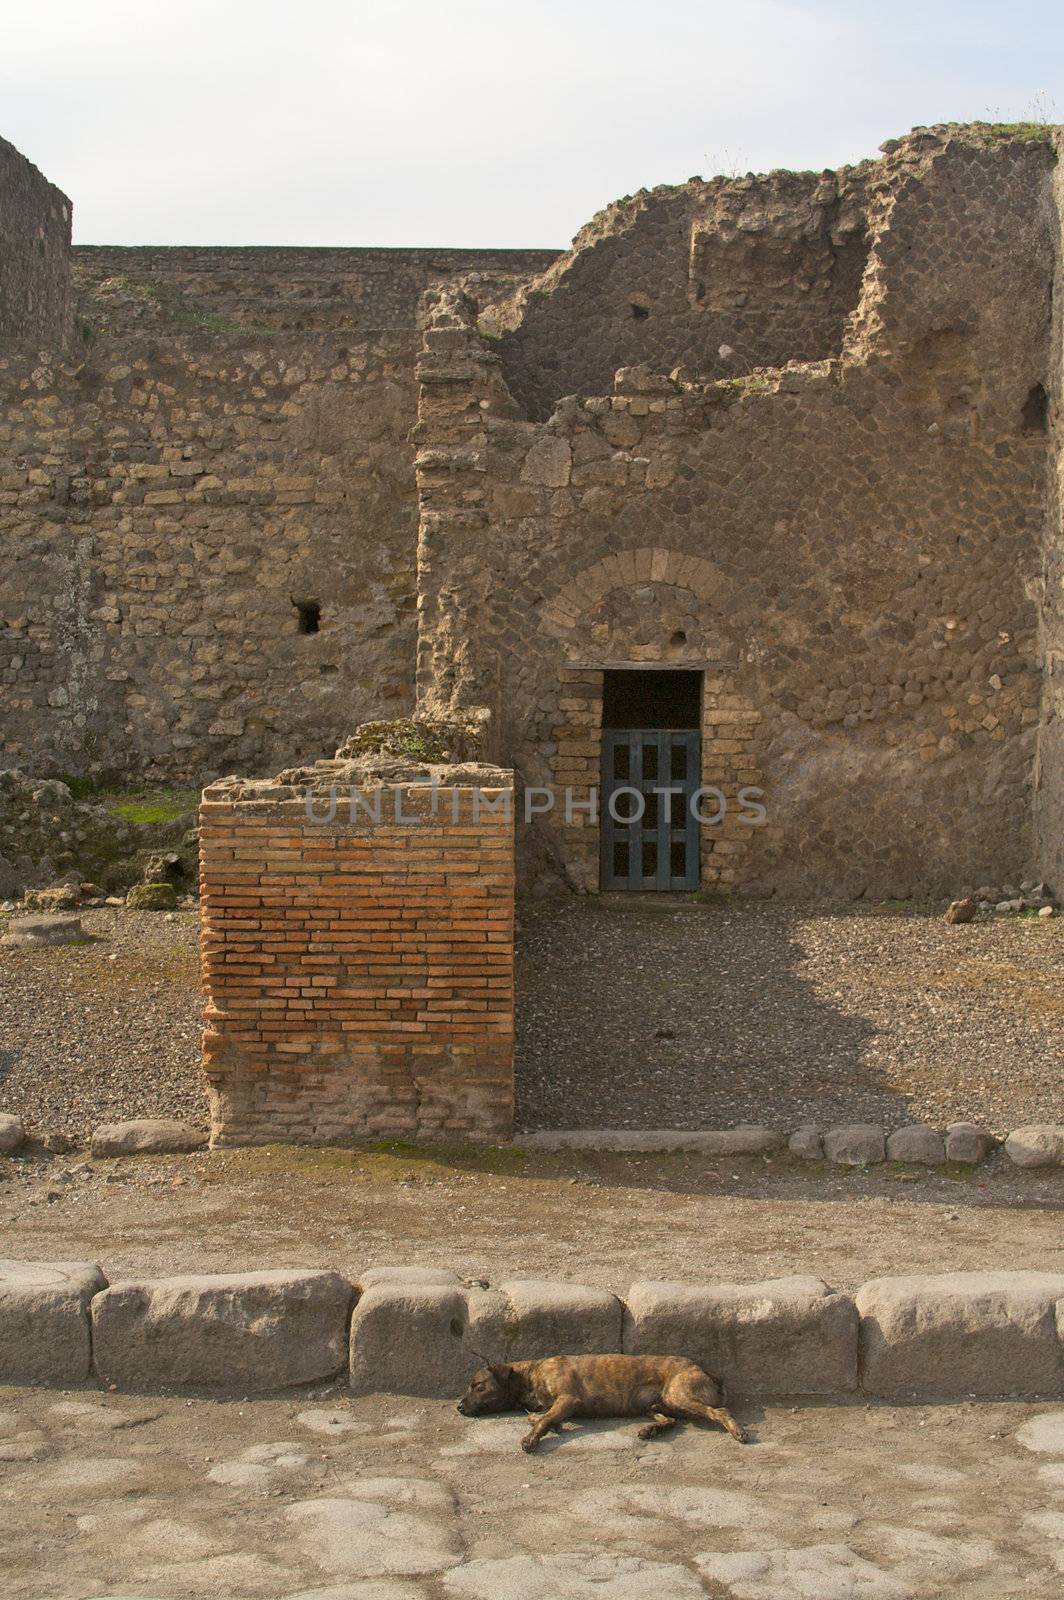 Cobblestone street and ancient ruins of Pompeii, Italy.